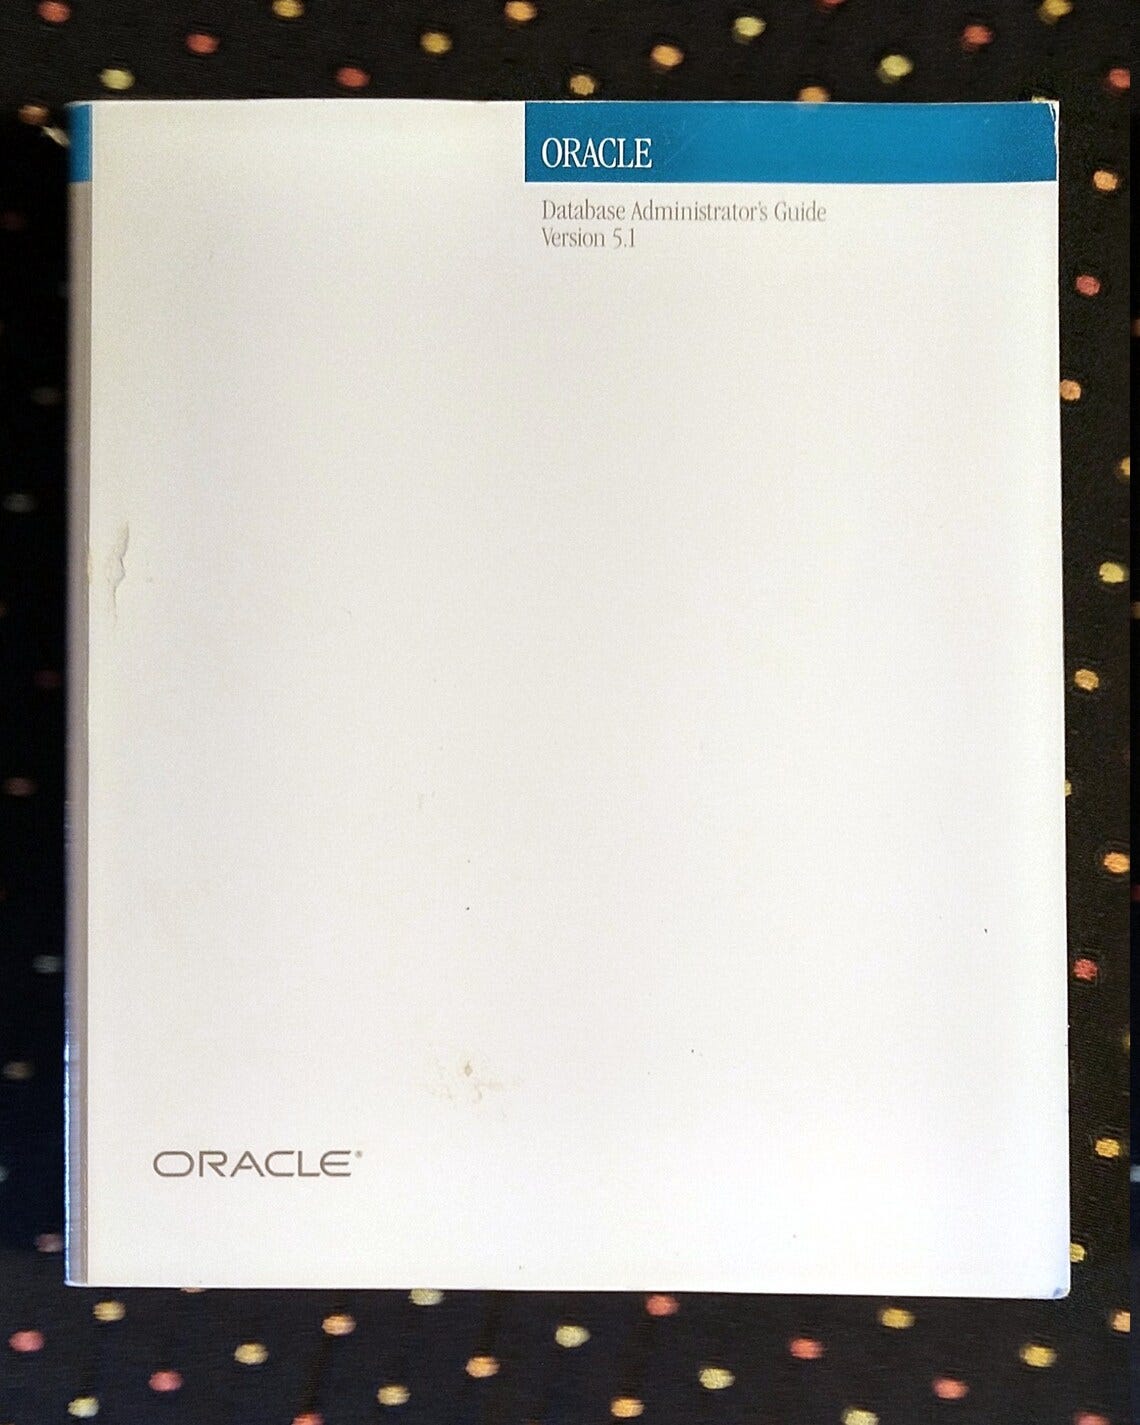 1986 Oracle 5.1 RDBMS Database Administrator's Guide image 4